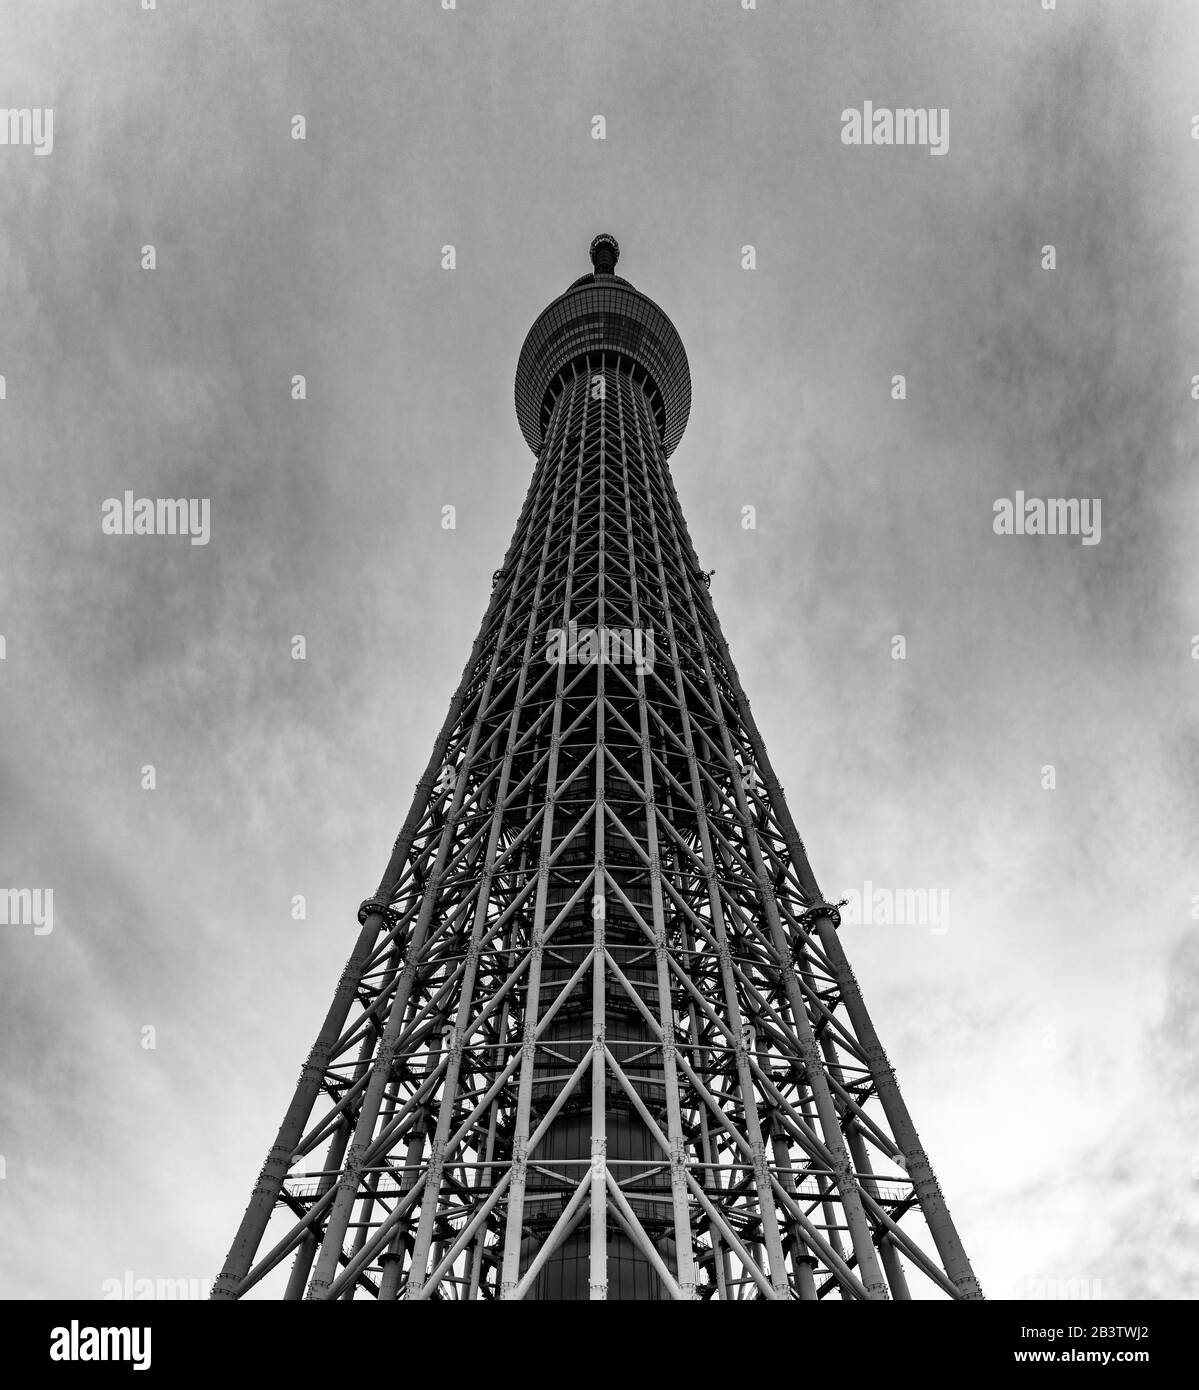 A black and white picture of the Tokyo Skytree as seen from below. Stock Photo